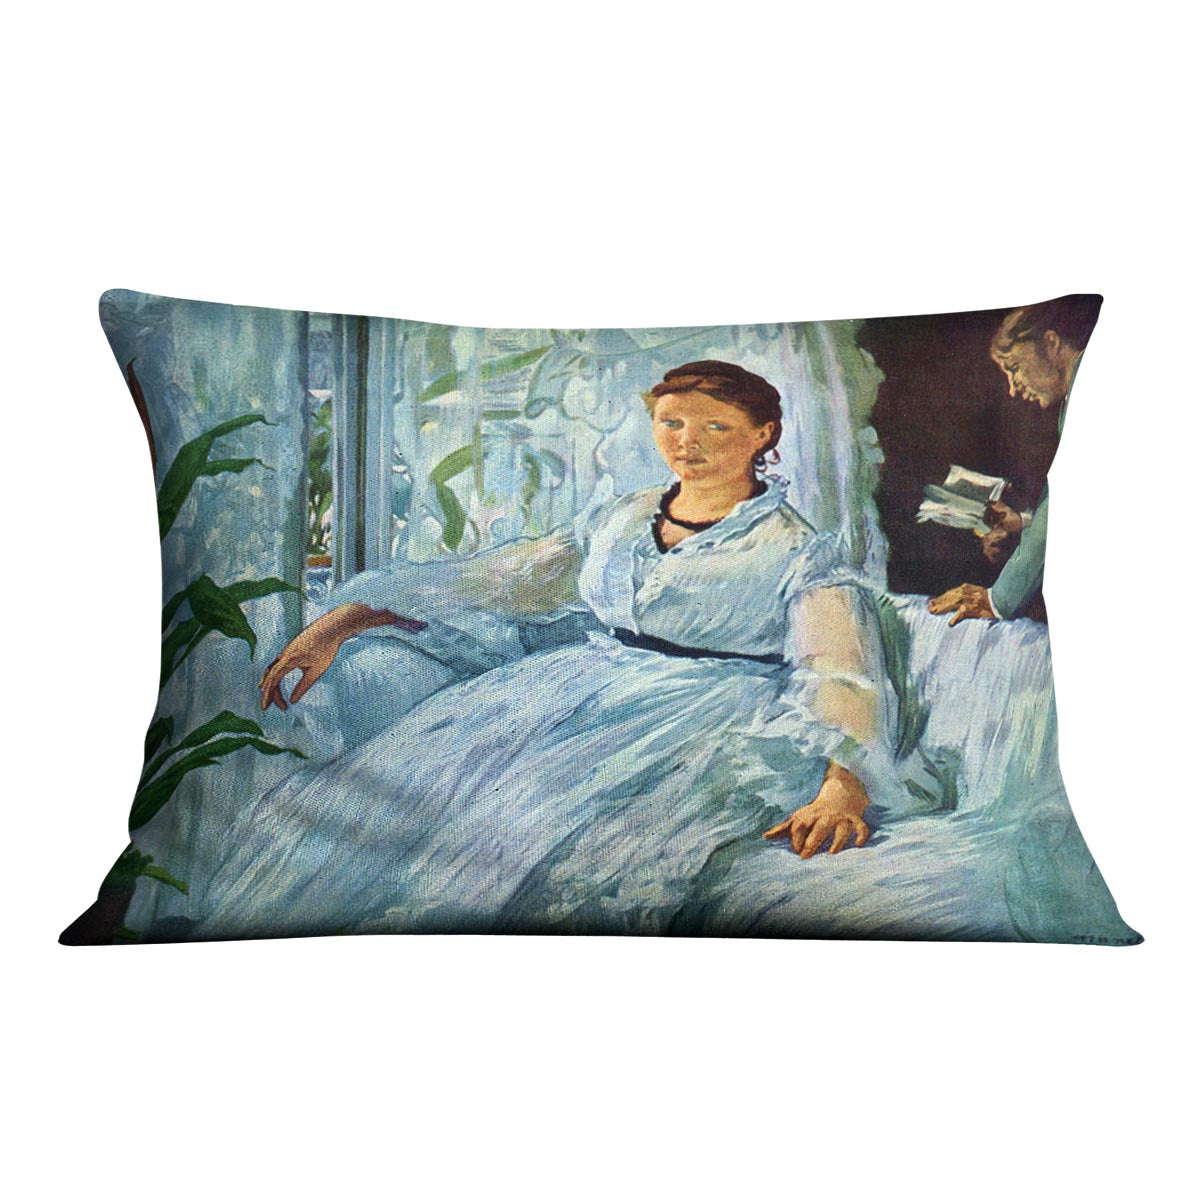 The Lecture by Manet Cushion